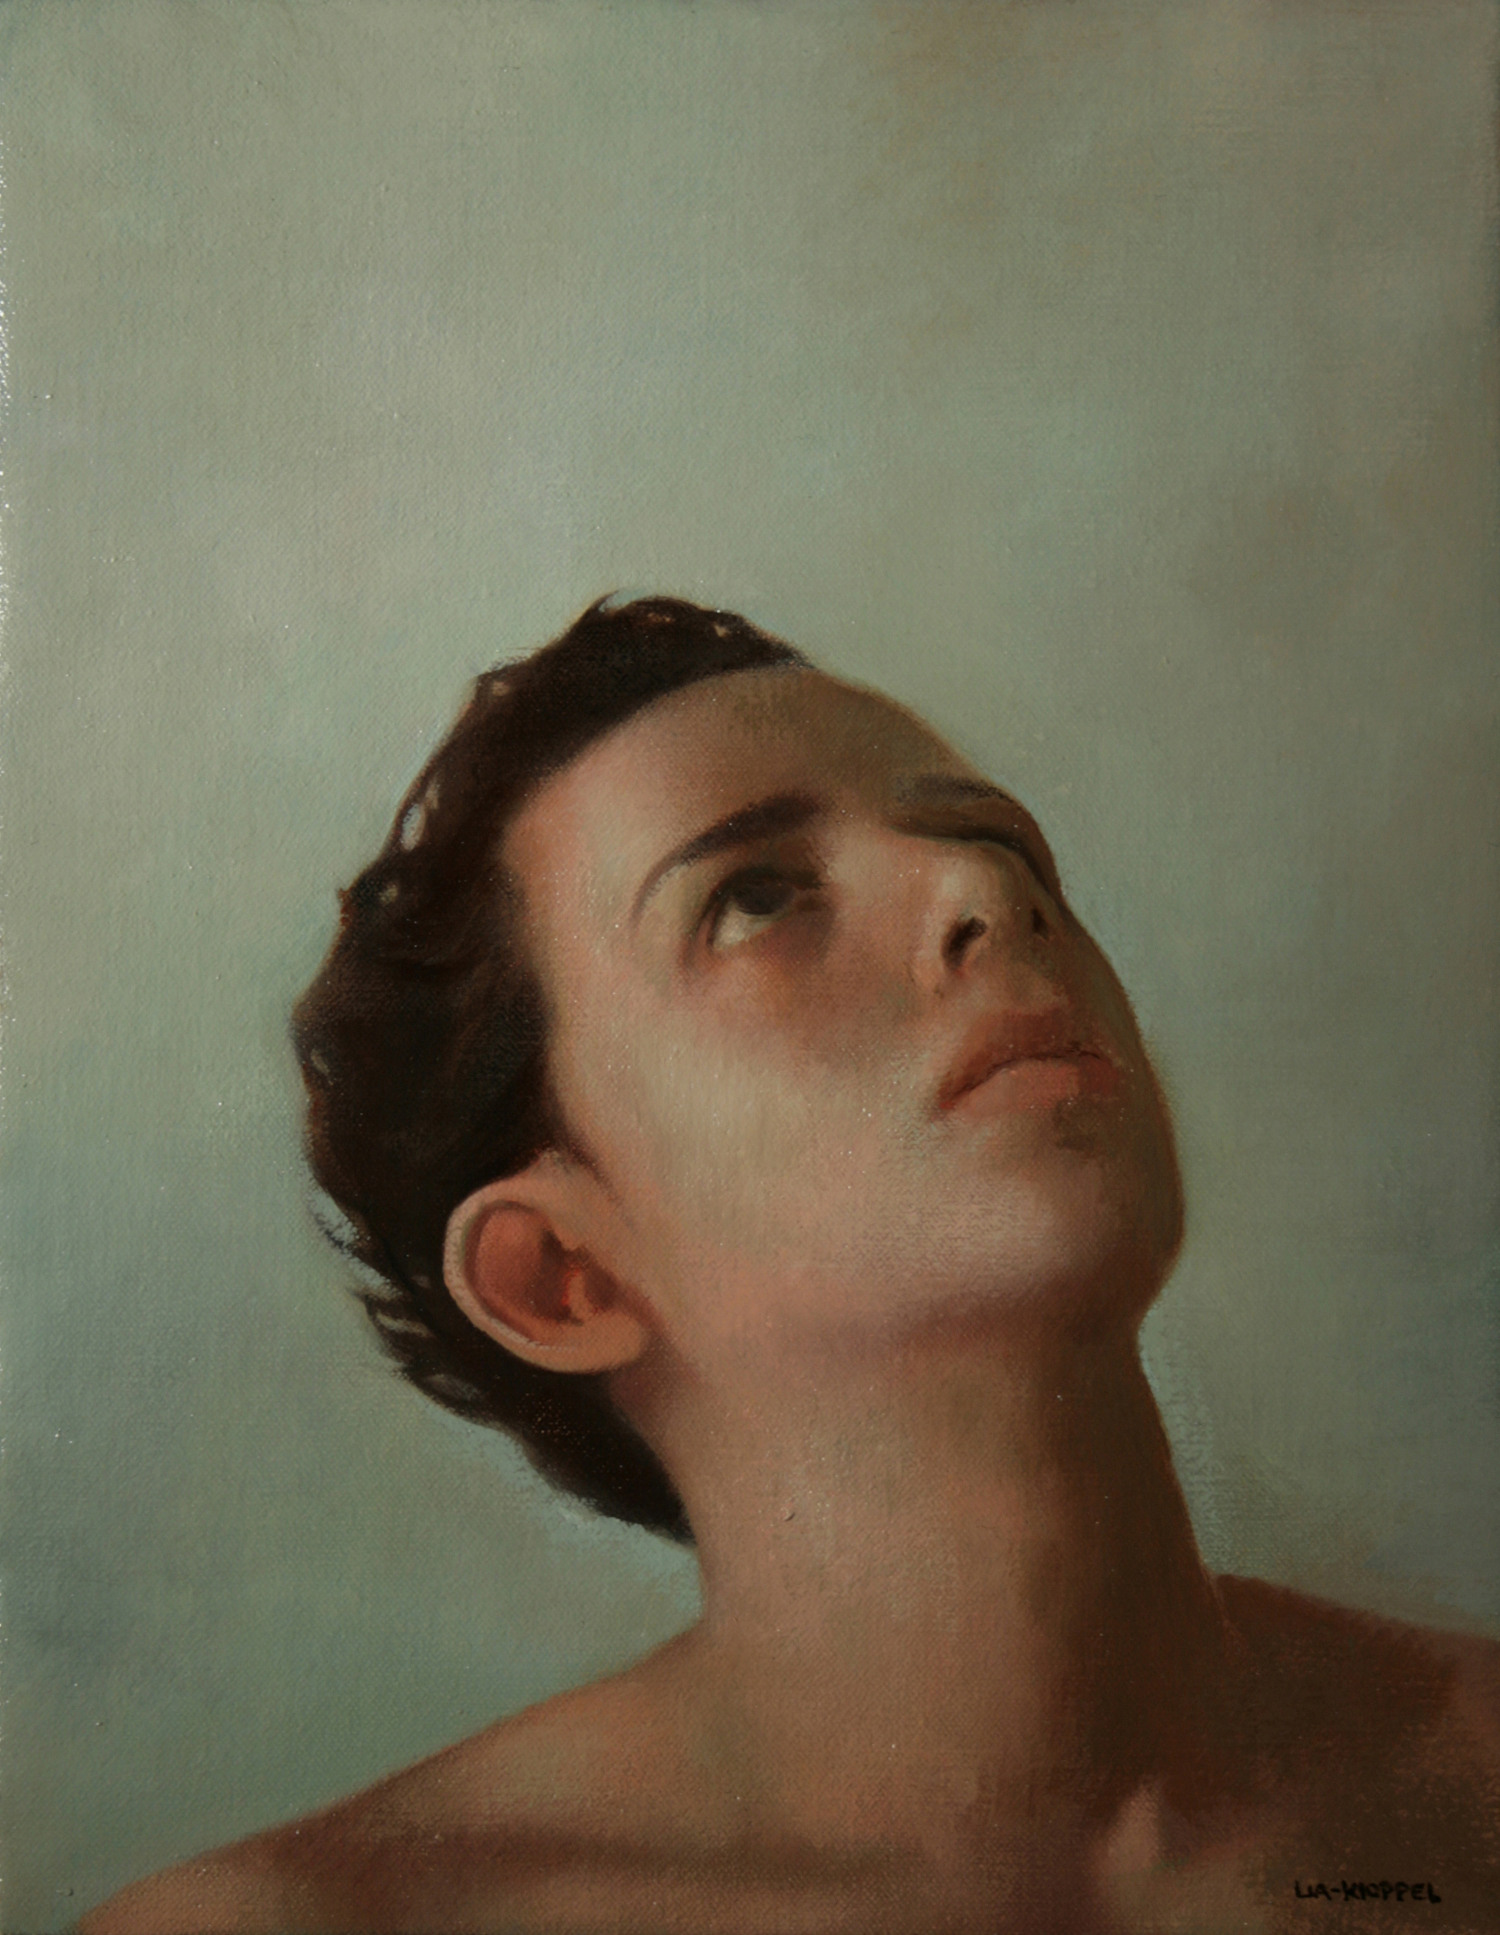   Man Looking Up,&nbsp; 2007, Oil on linen, 14 x 11 inches, Private collection 